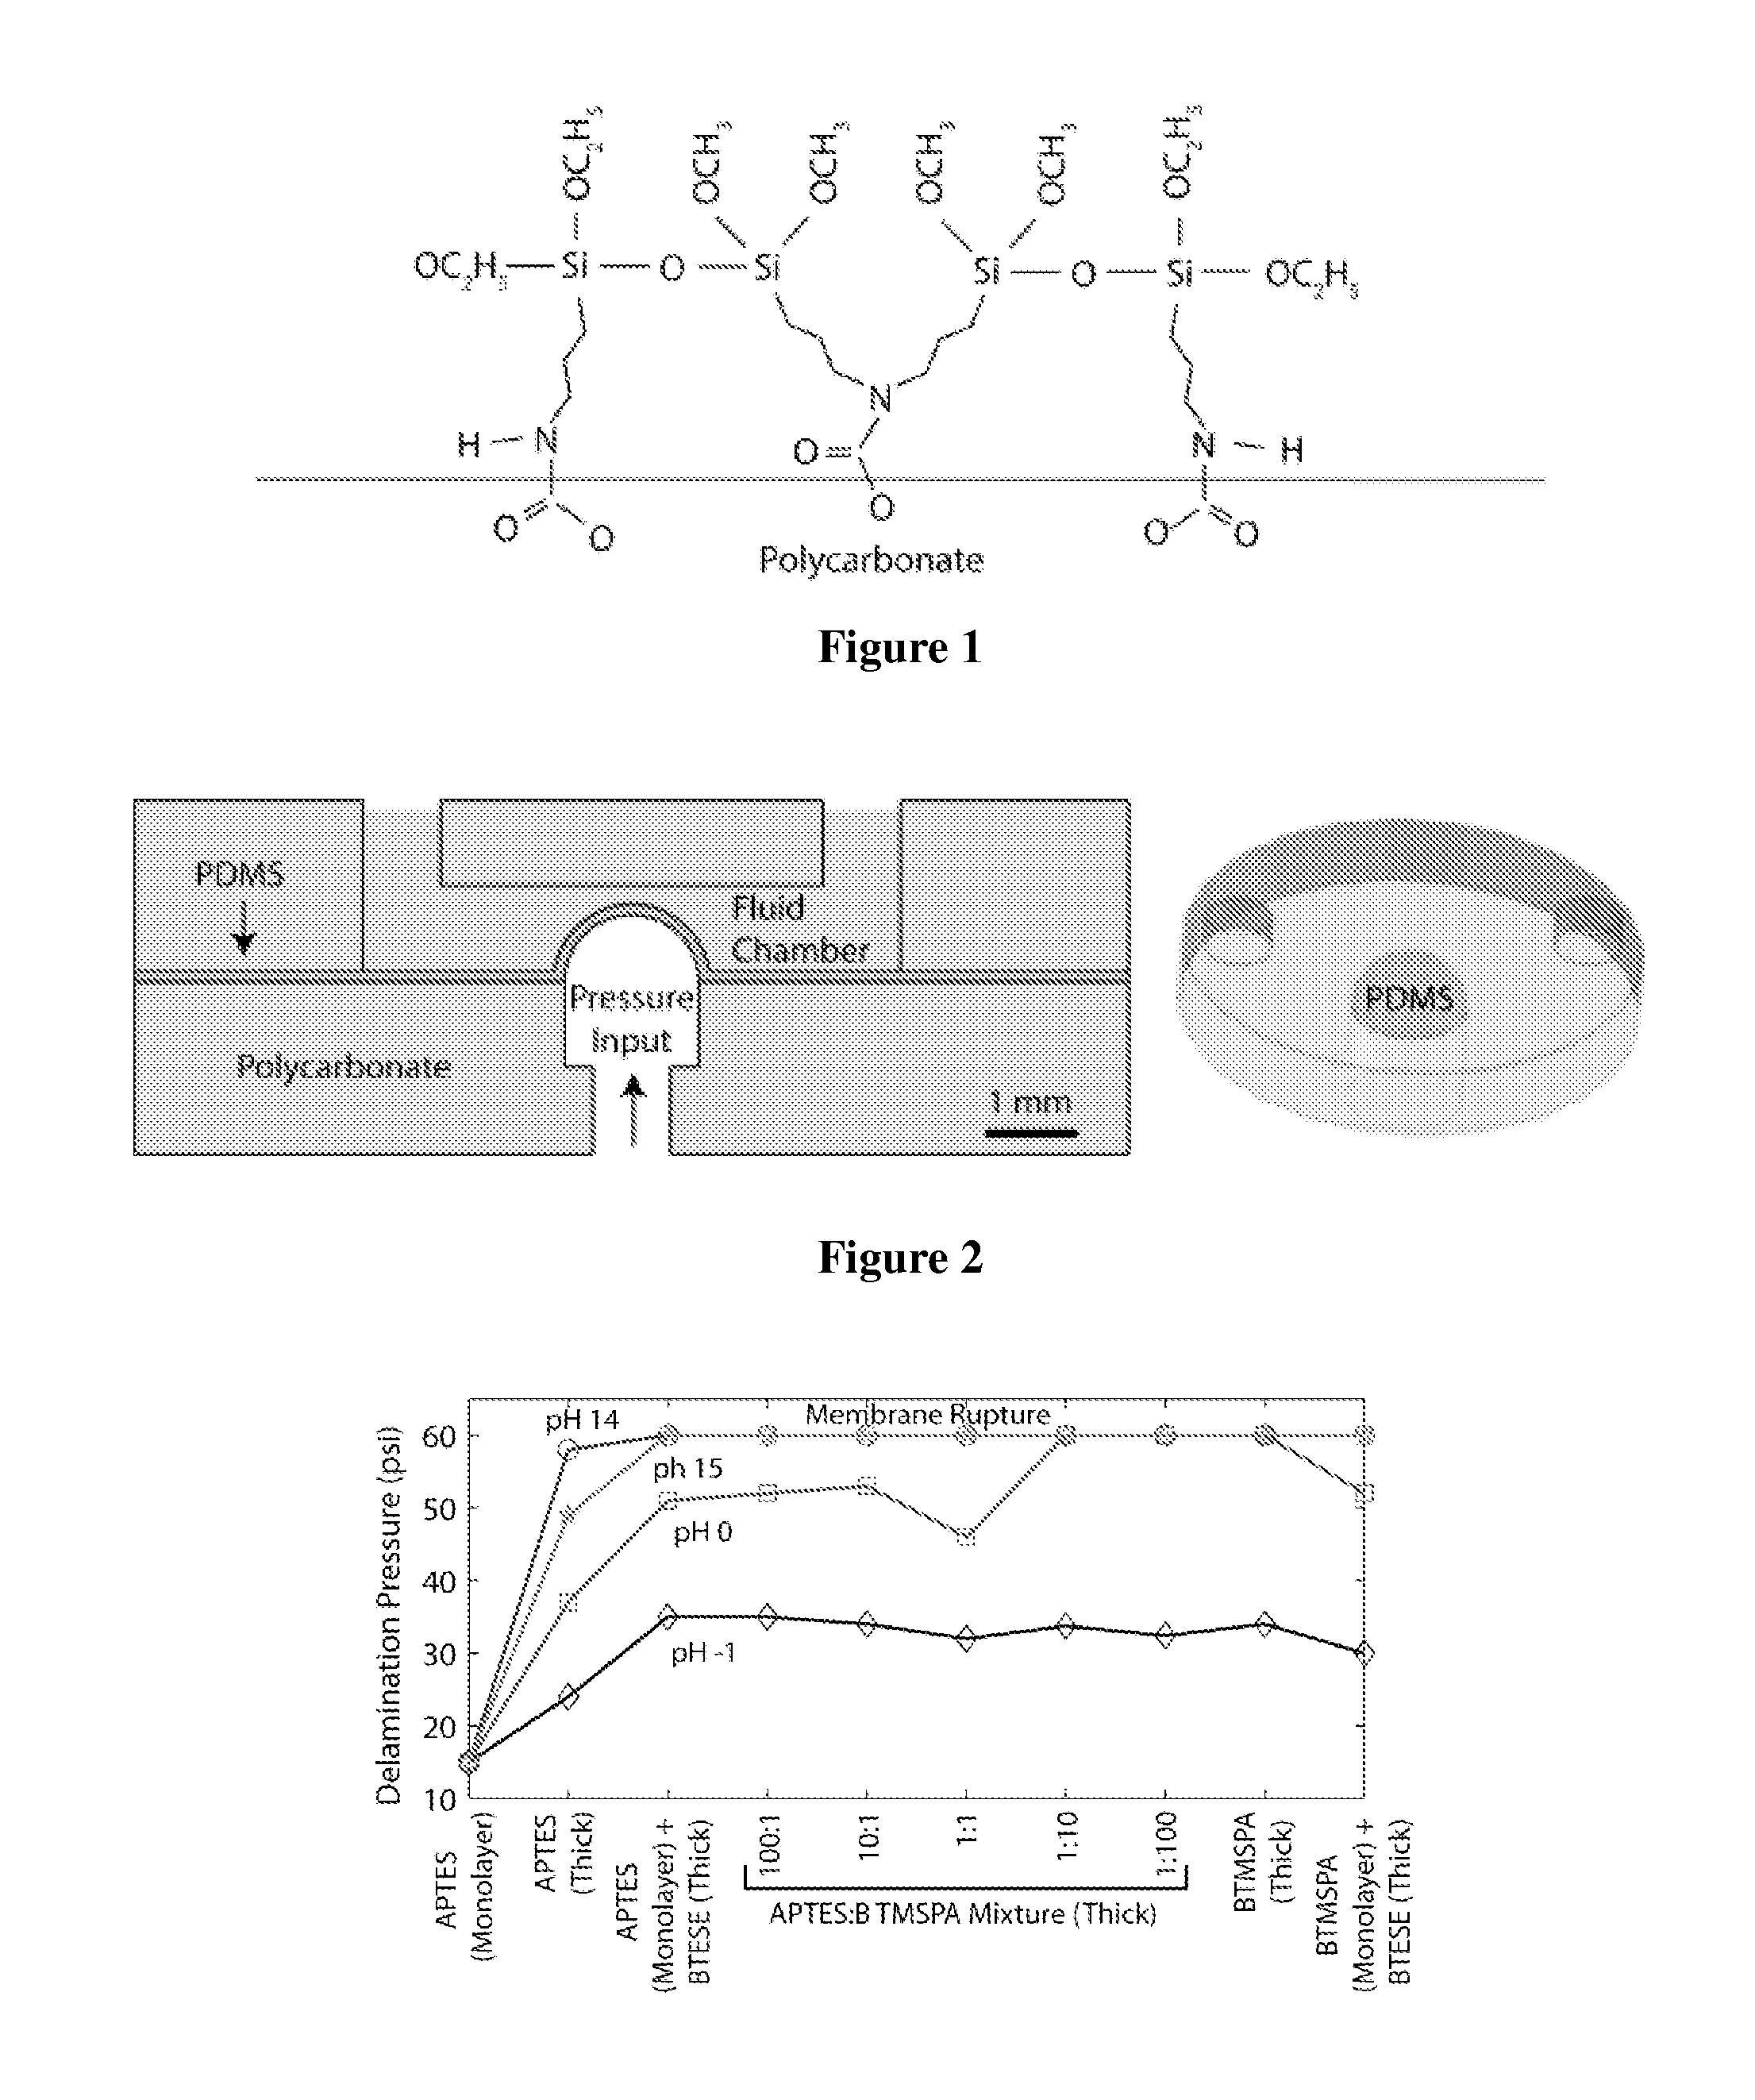 Method of hydrolytically stable bonding of elastomers to substrates